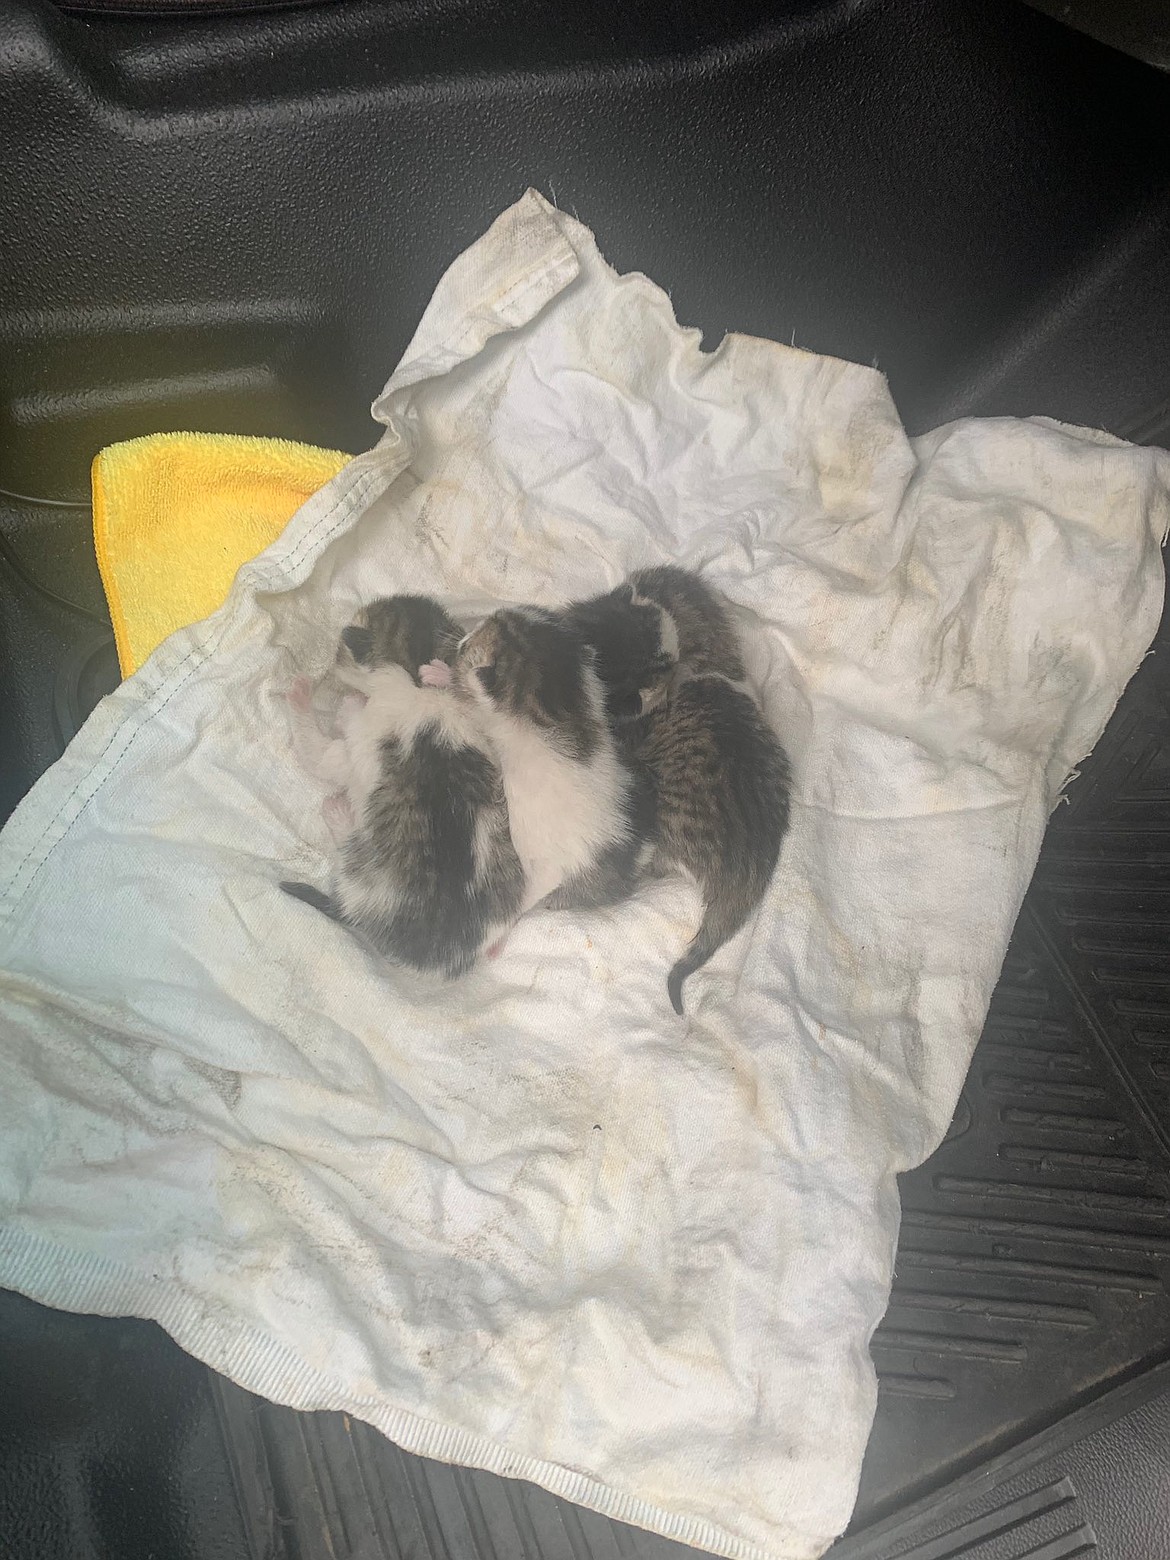 The four kittens located in the abandoned boat were roughly a week old, still had their eyes closed and require bottle-feeding.